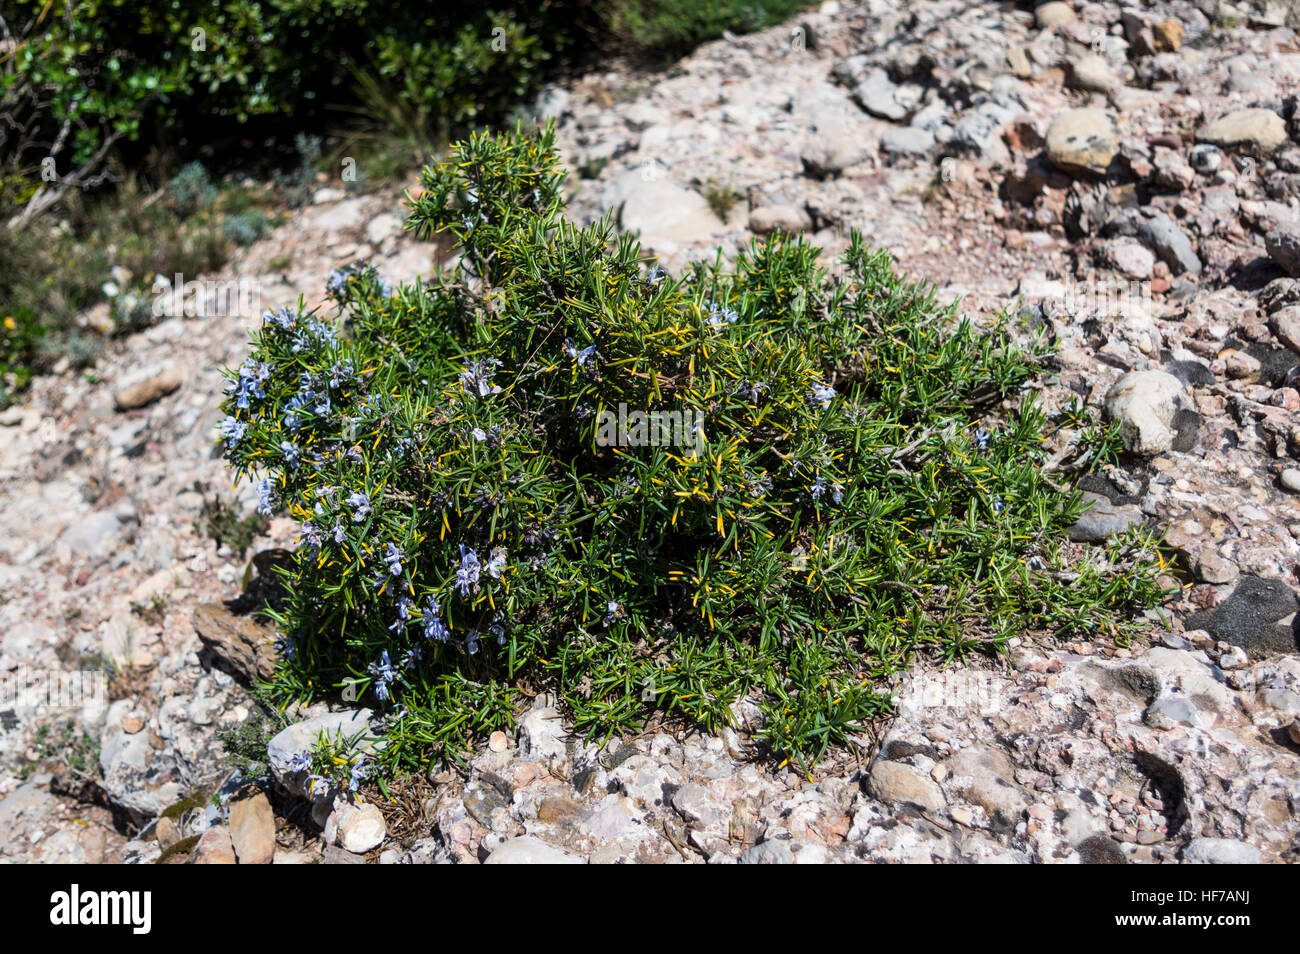 Rosemary (Rosmarinus officinalis) growing on conglomerate rock soil in Catalonia, Spain. Stock Photo